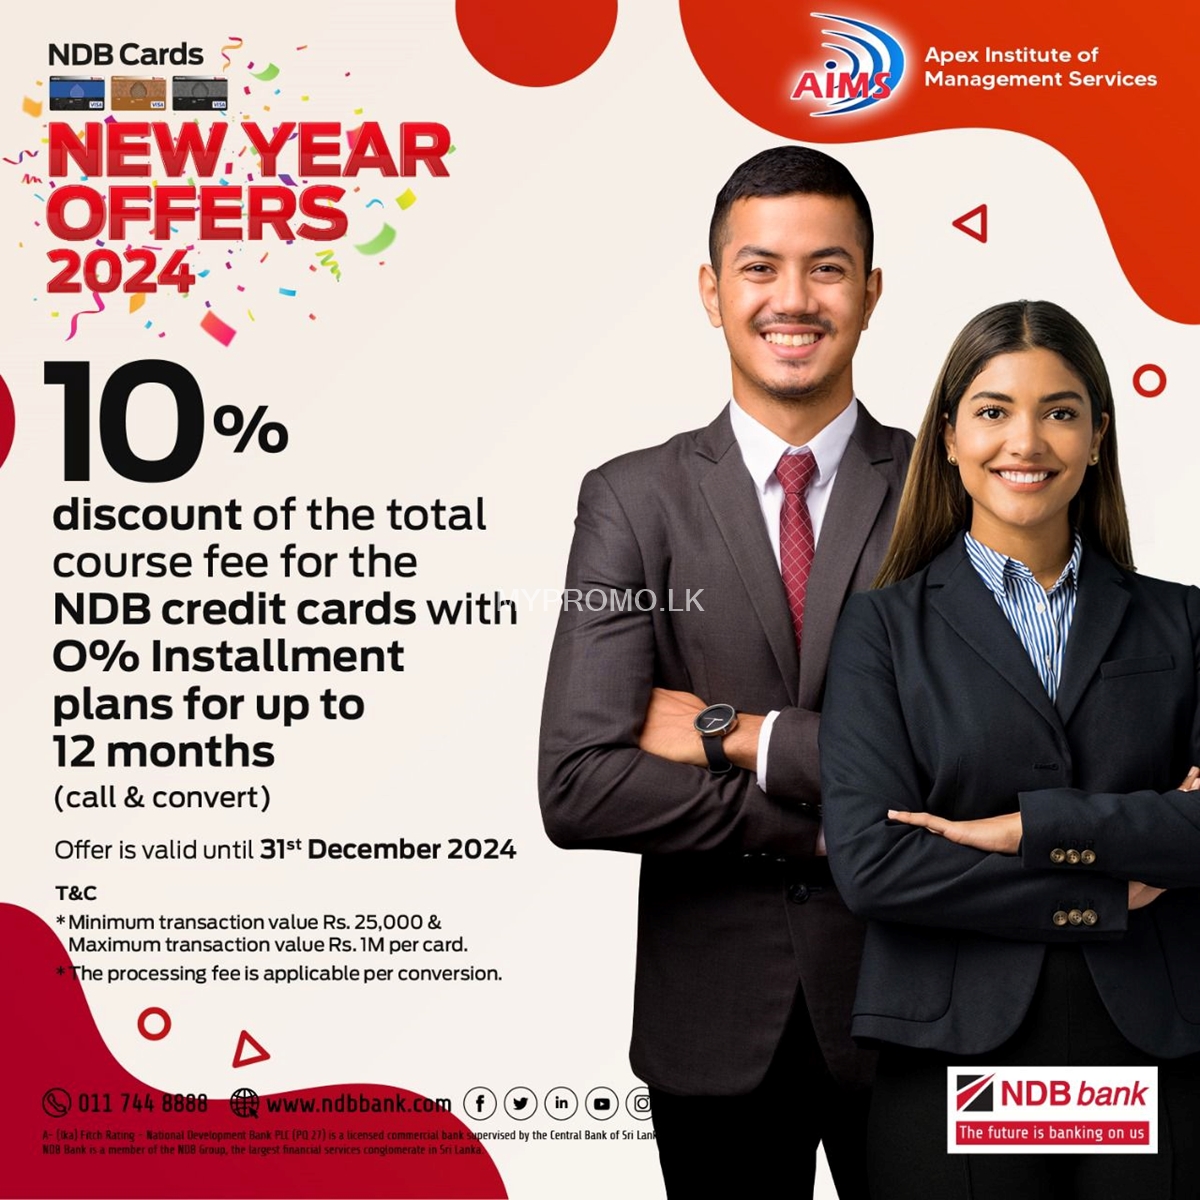 Enjoy a 10% discount on your total course fee when you enroll with NDB Credit cards